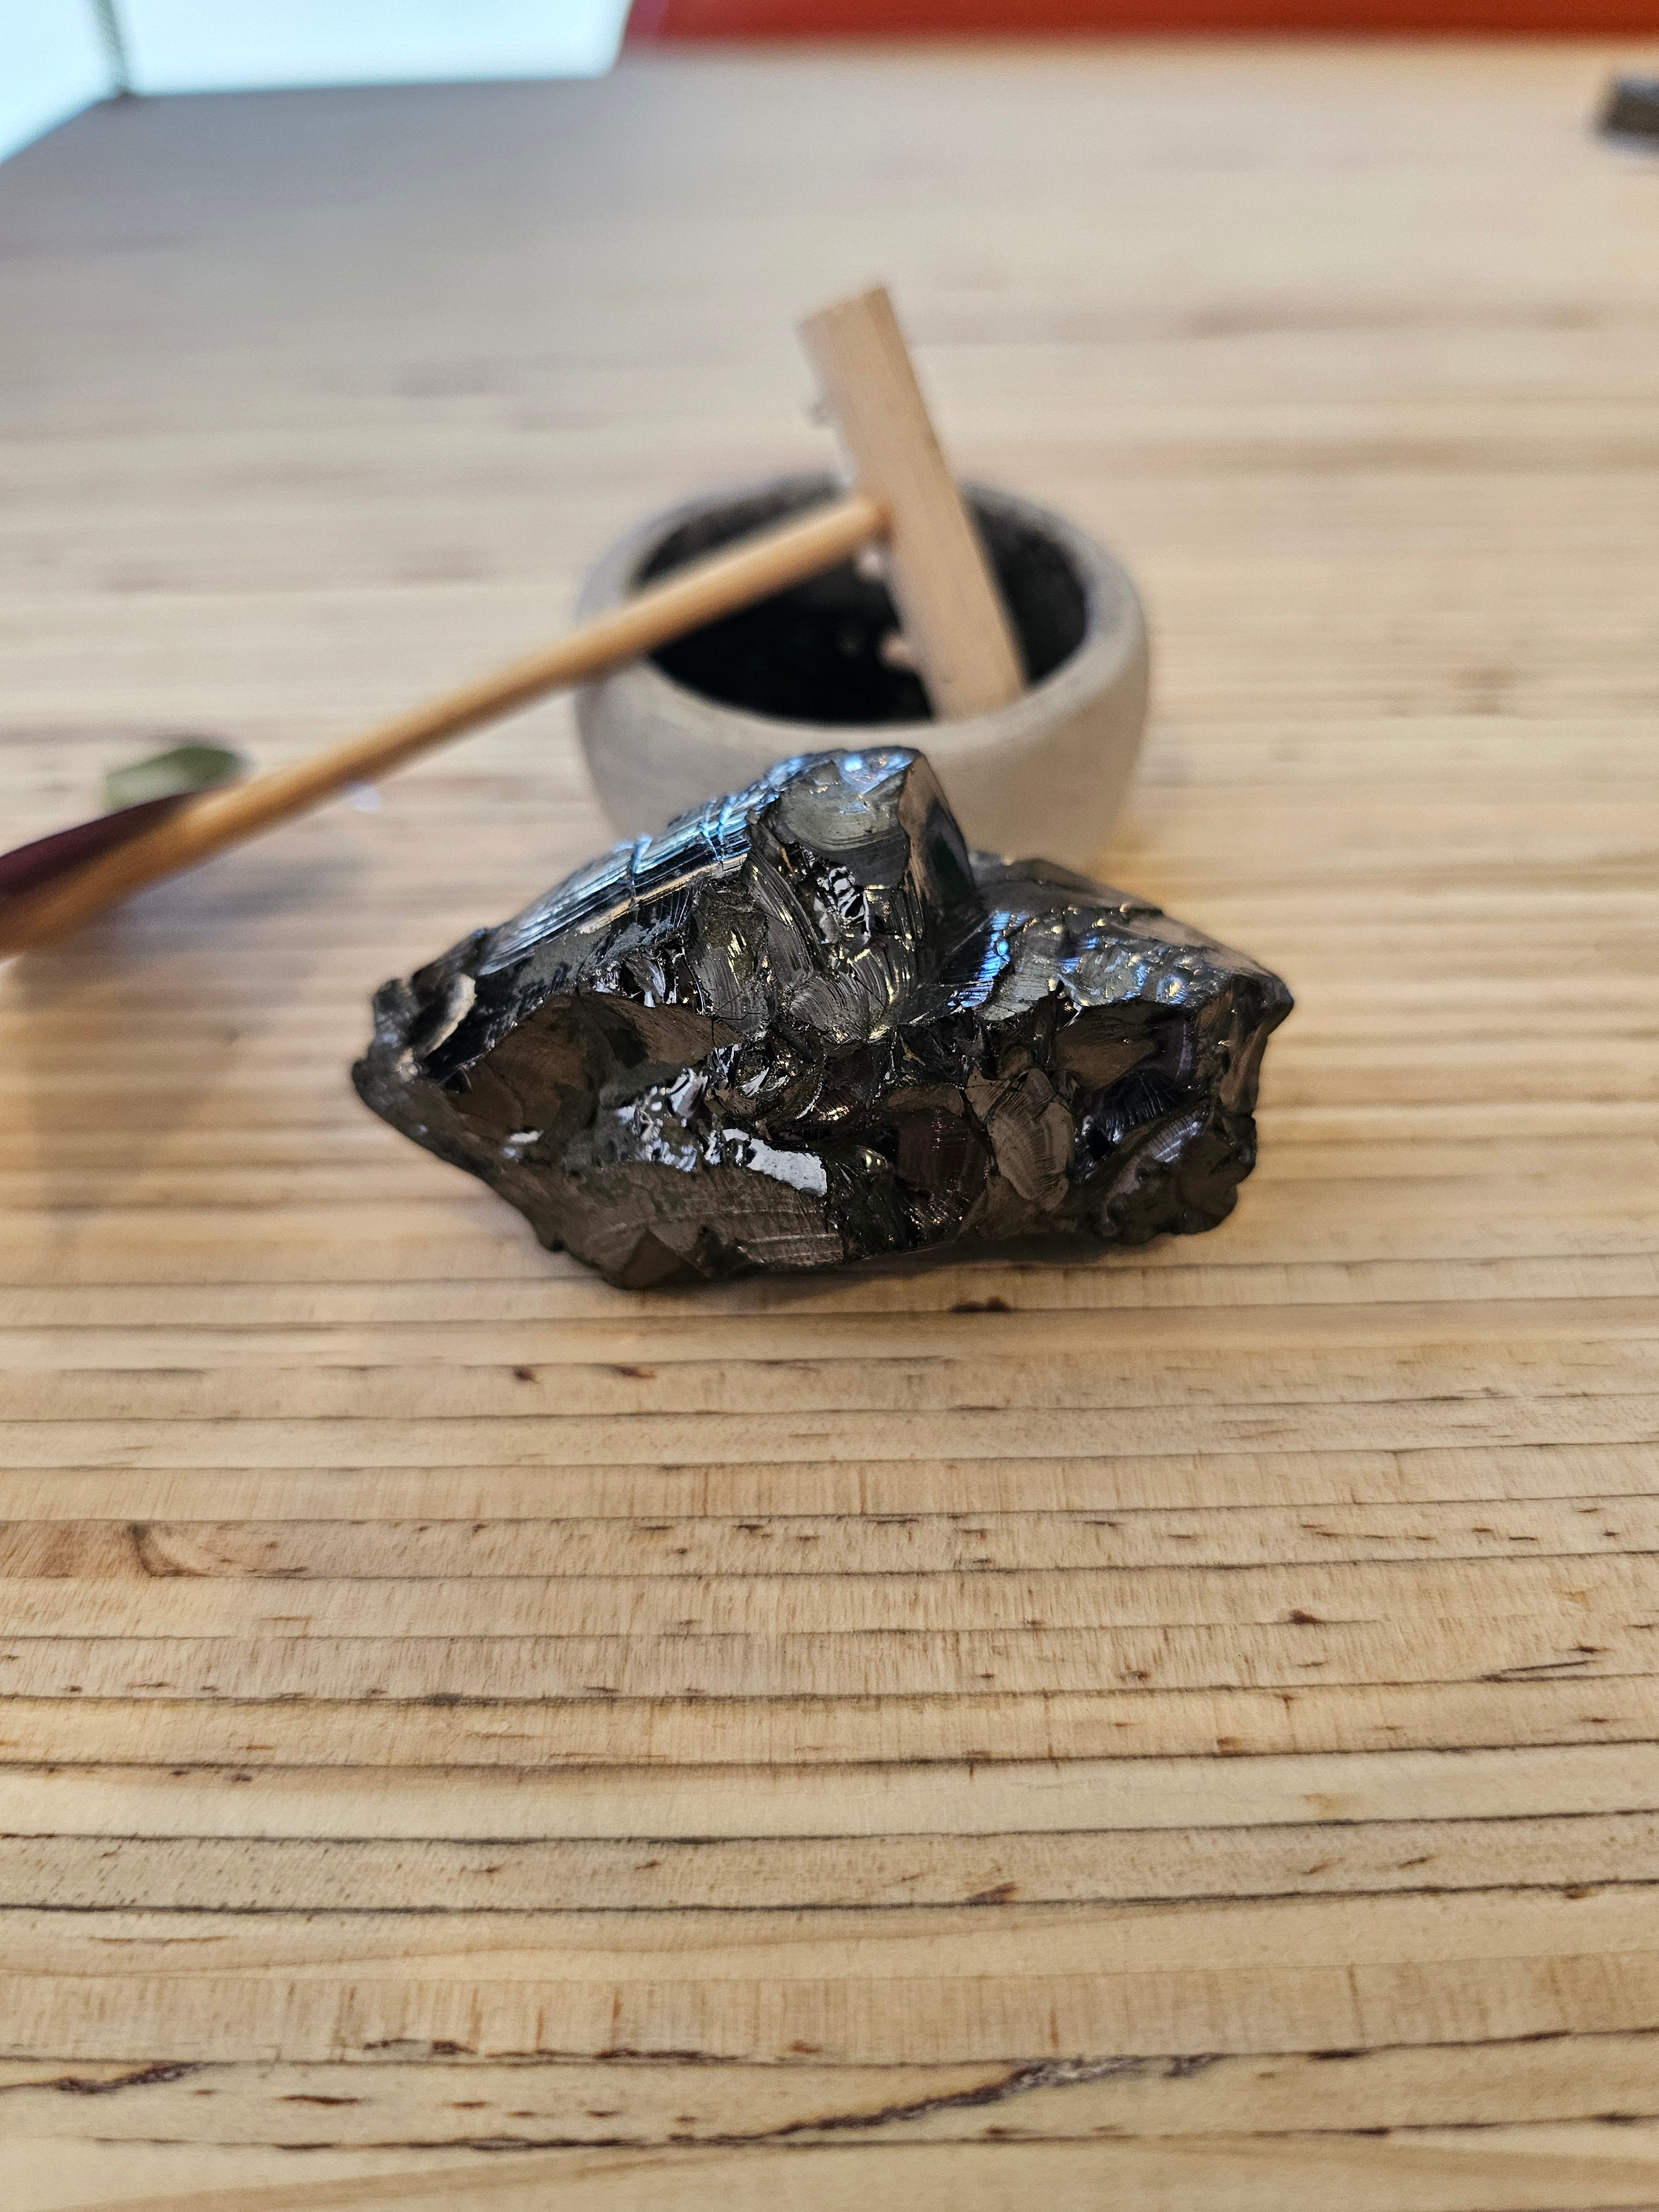 The Ultimate Shungite: Rare One-Piece Nugget - Ruepehu - GroundedKiwi.nz